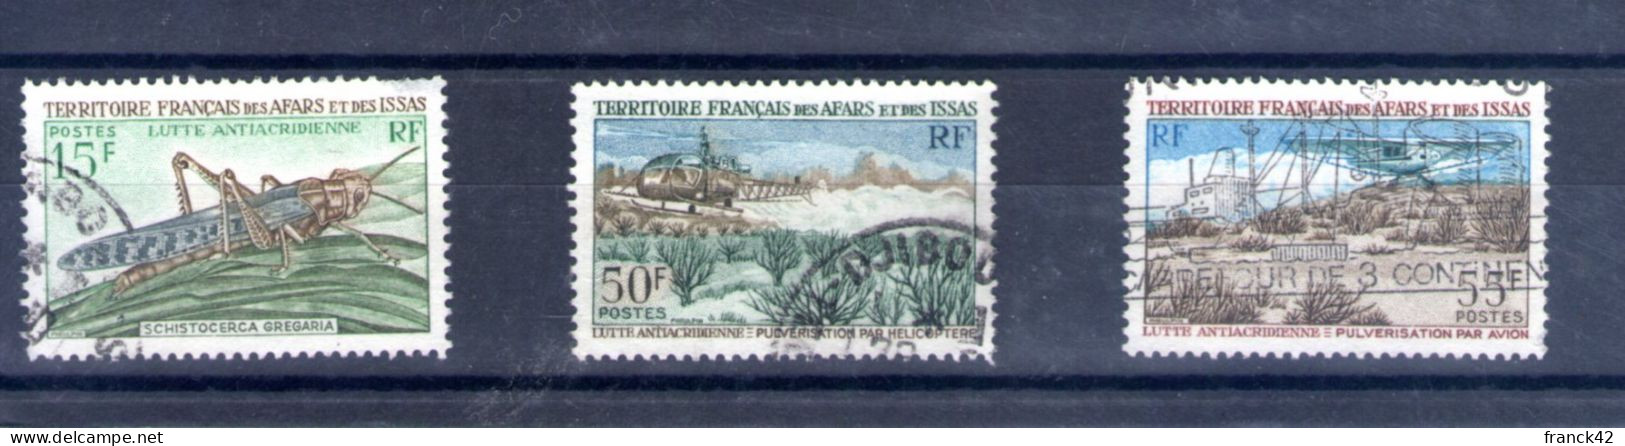 Afars Et Issas. Lutte Antiacridienne. 1969 - Used Stamps